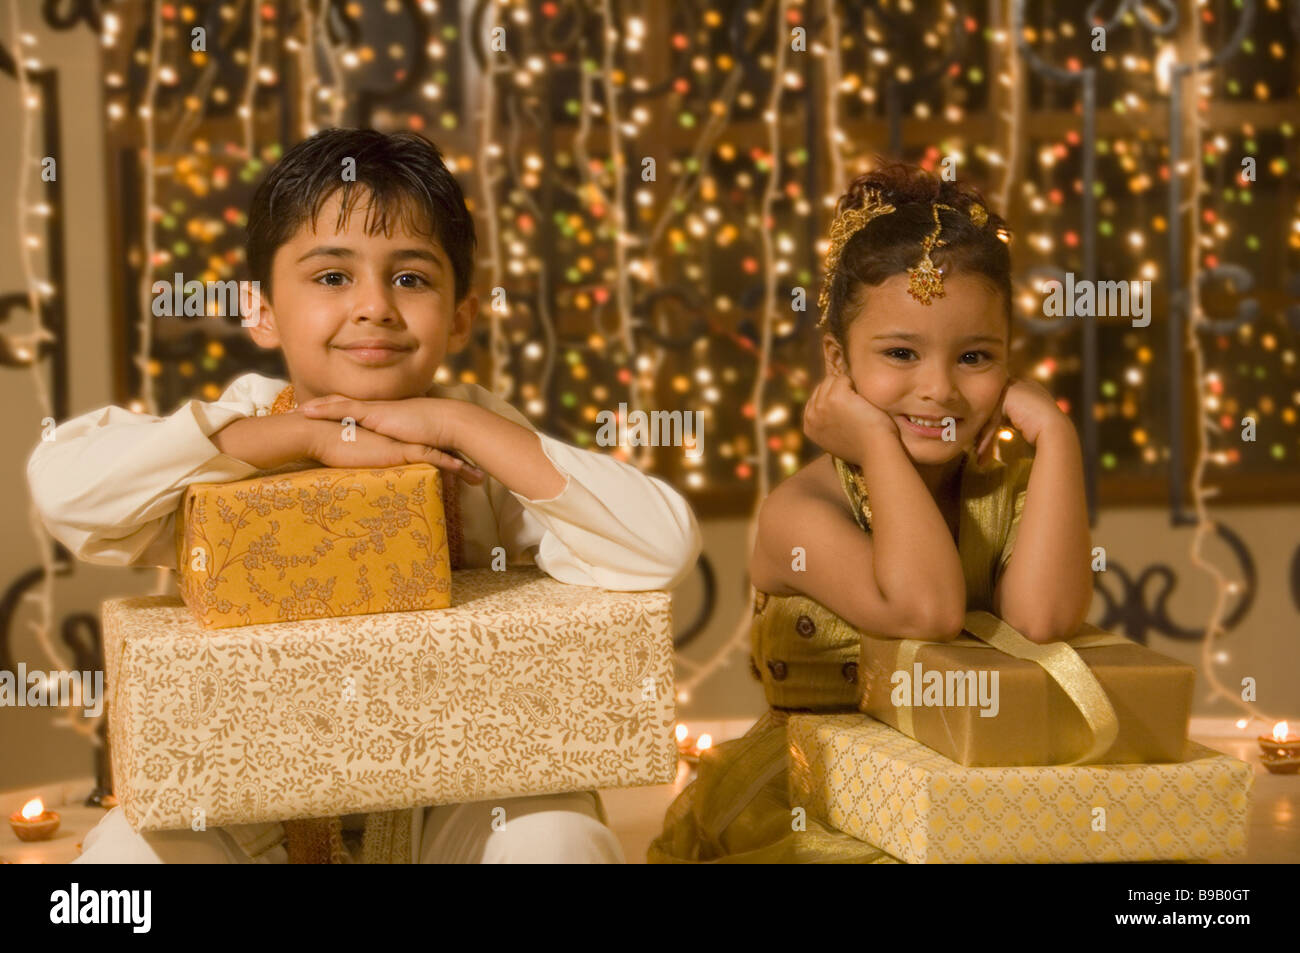 Boy sitting with his sister and holding Diwali gifts Stock Photo